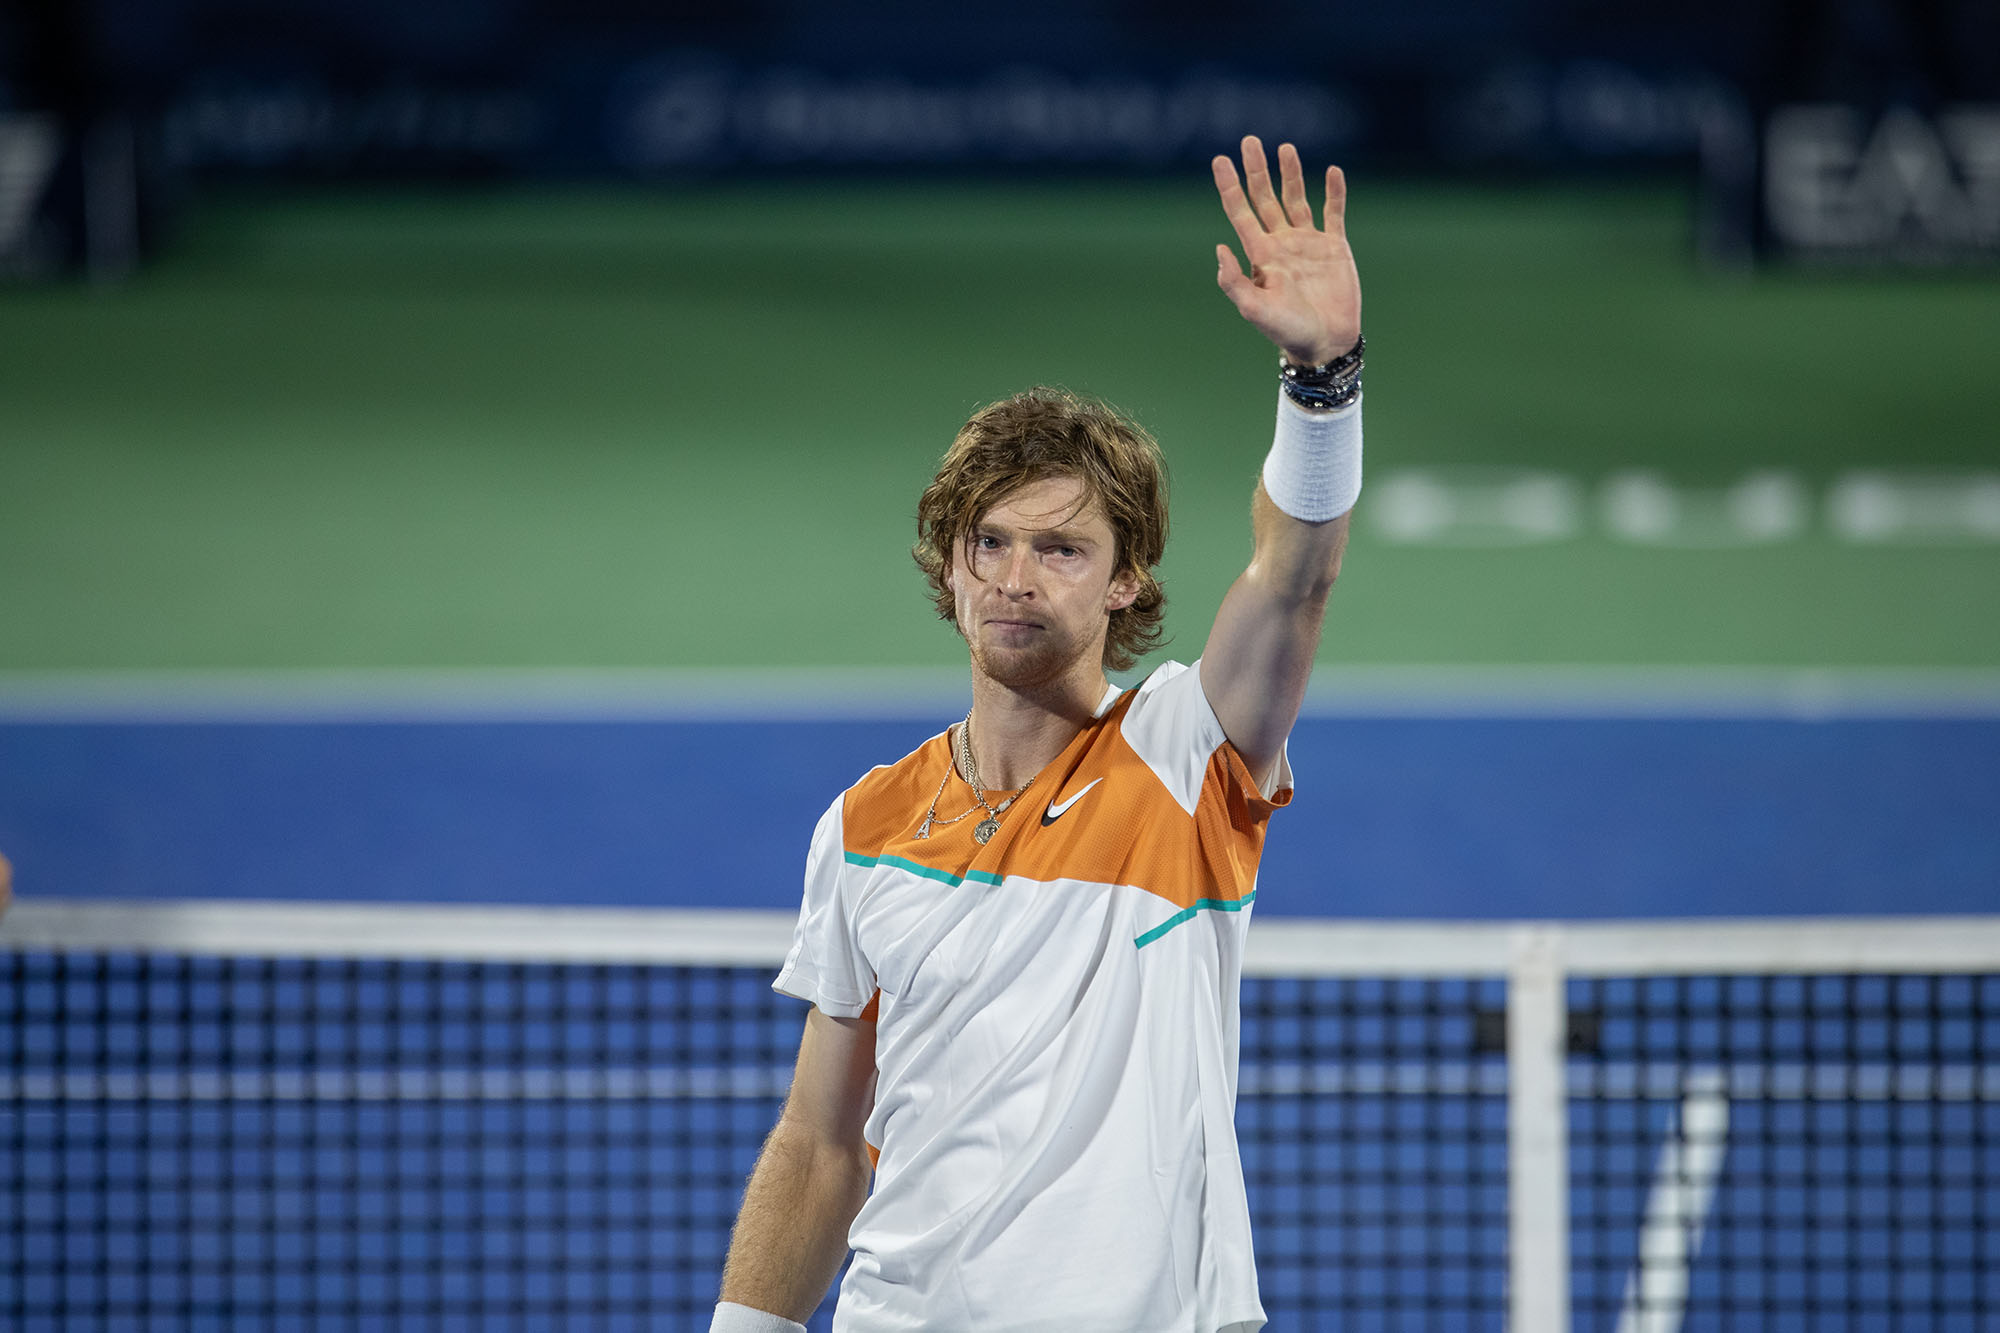 Andrey Rublev and Jiri Vesely to clash in final of Dubai Duty Free Tennis  Championships